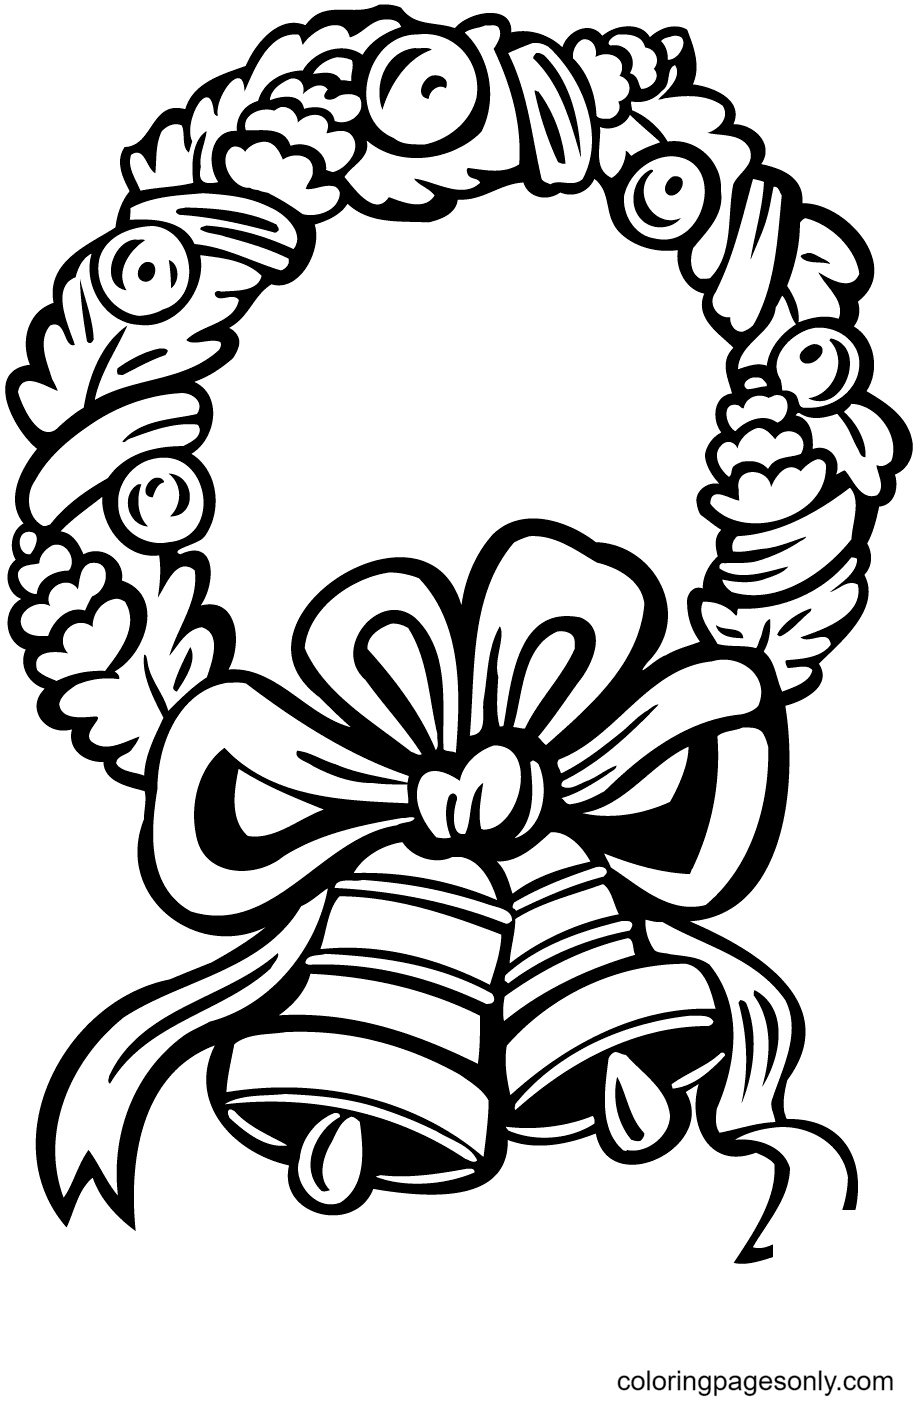 Christmas Wreath with Jingle Bells Coloring Page